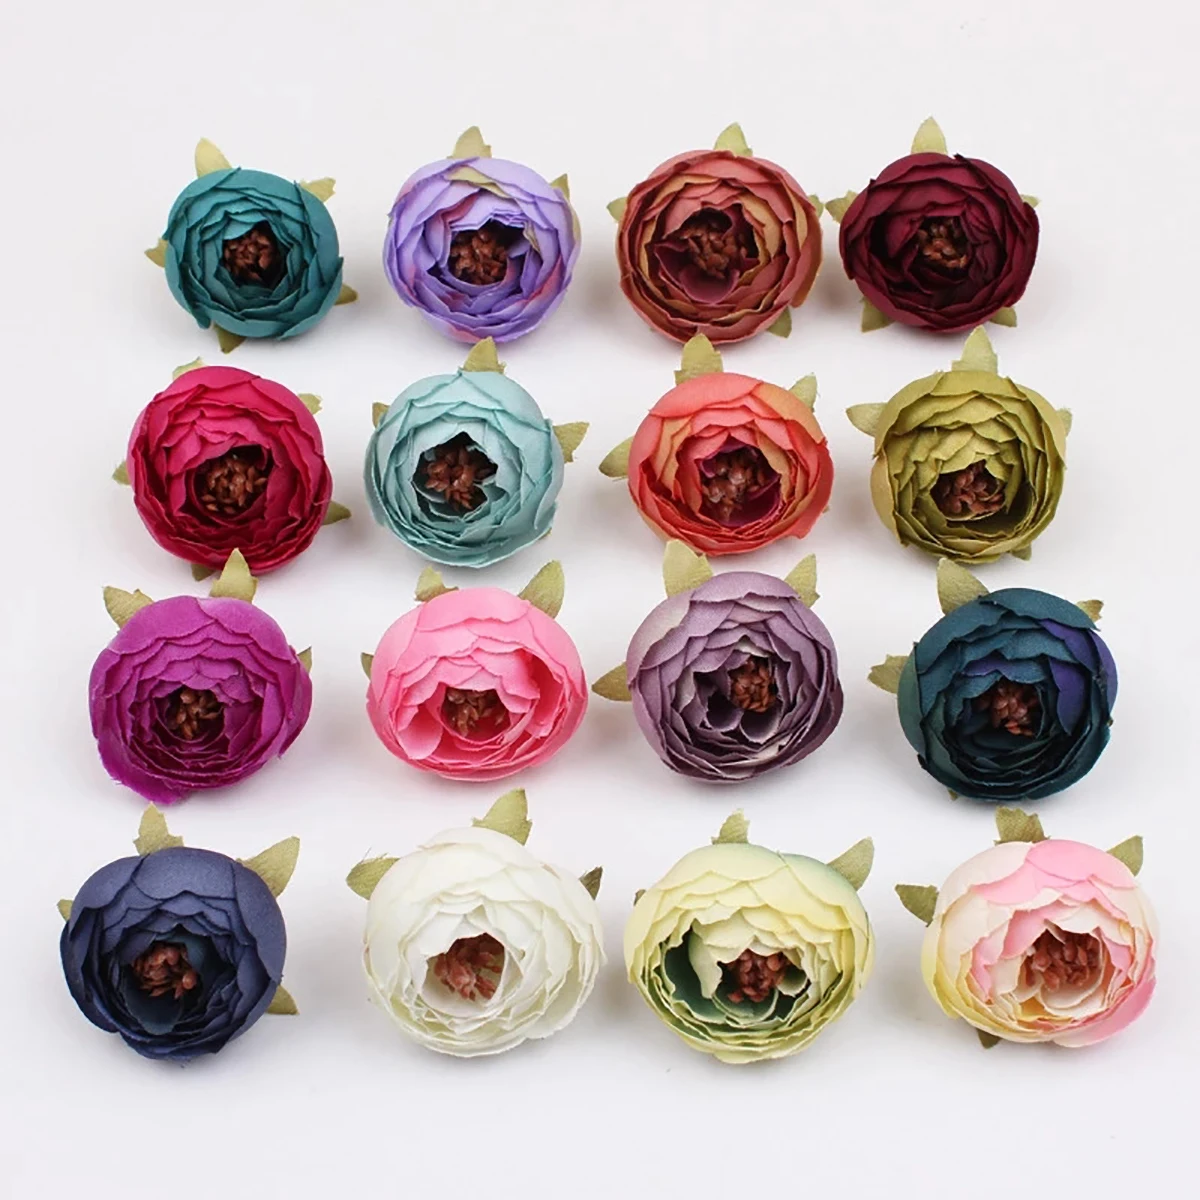 

10Pcs Artificial Flowers 3.5CM Bud Silk Camellia Head For Wedding Party Home Garden Decorations DIY Craft Wreath Christmas Gifts